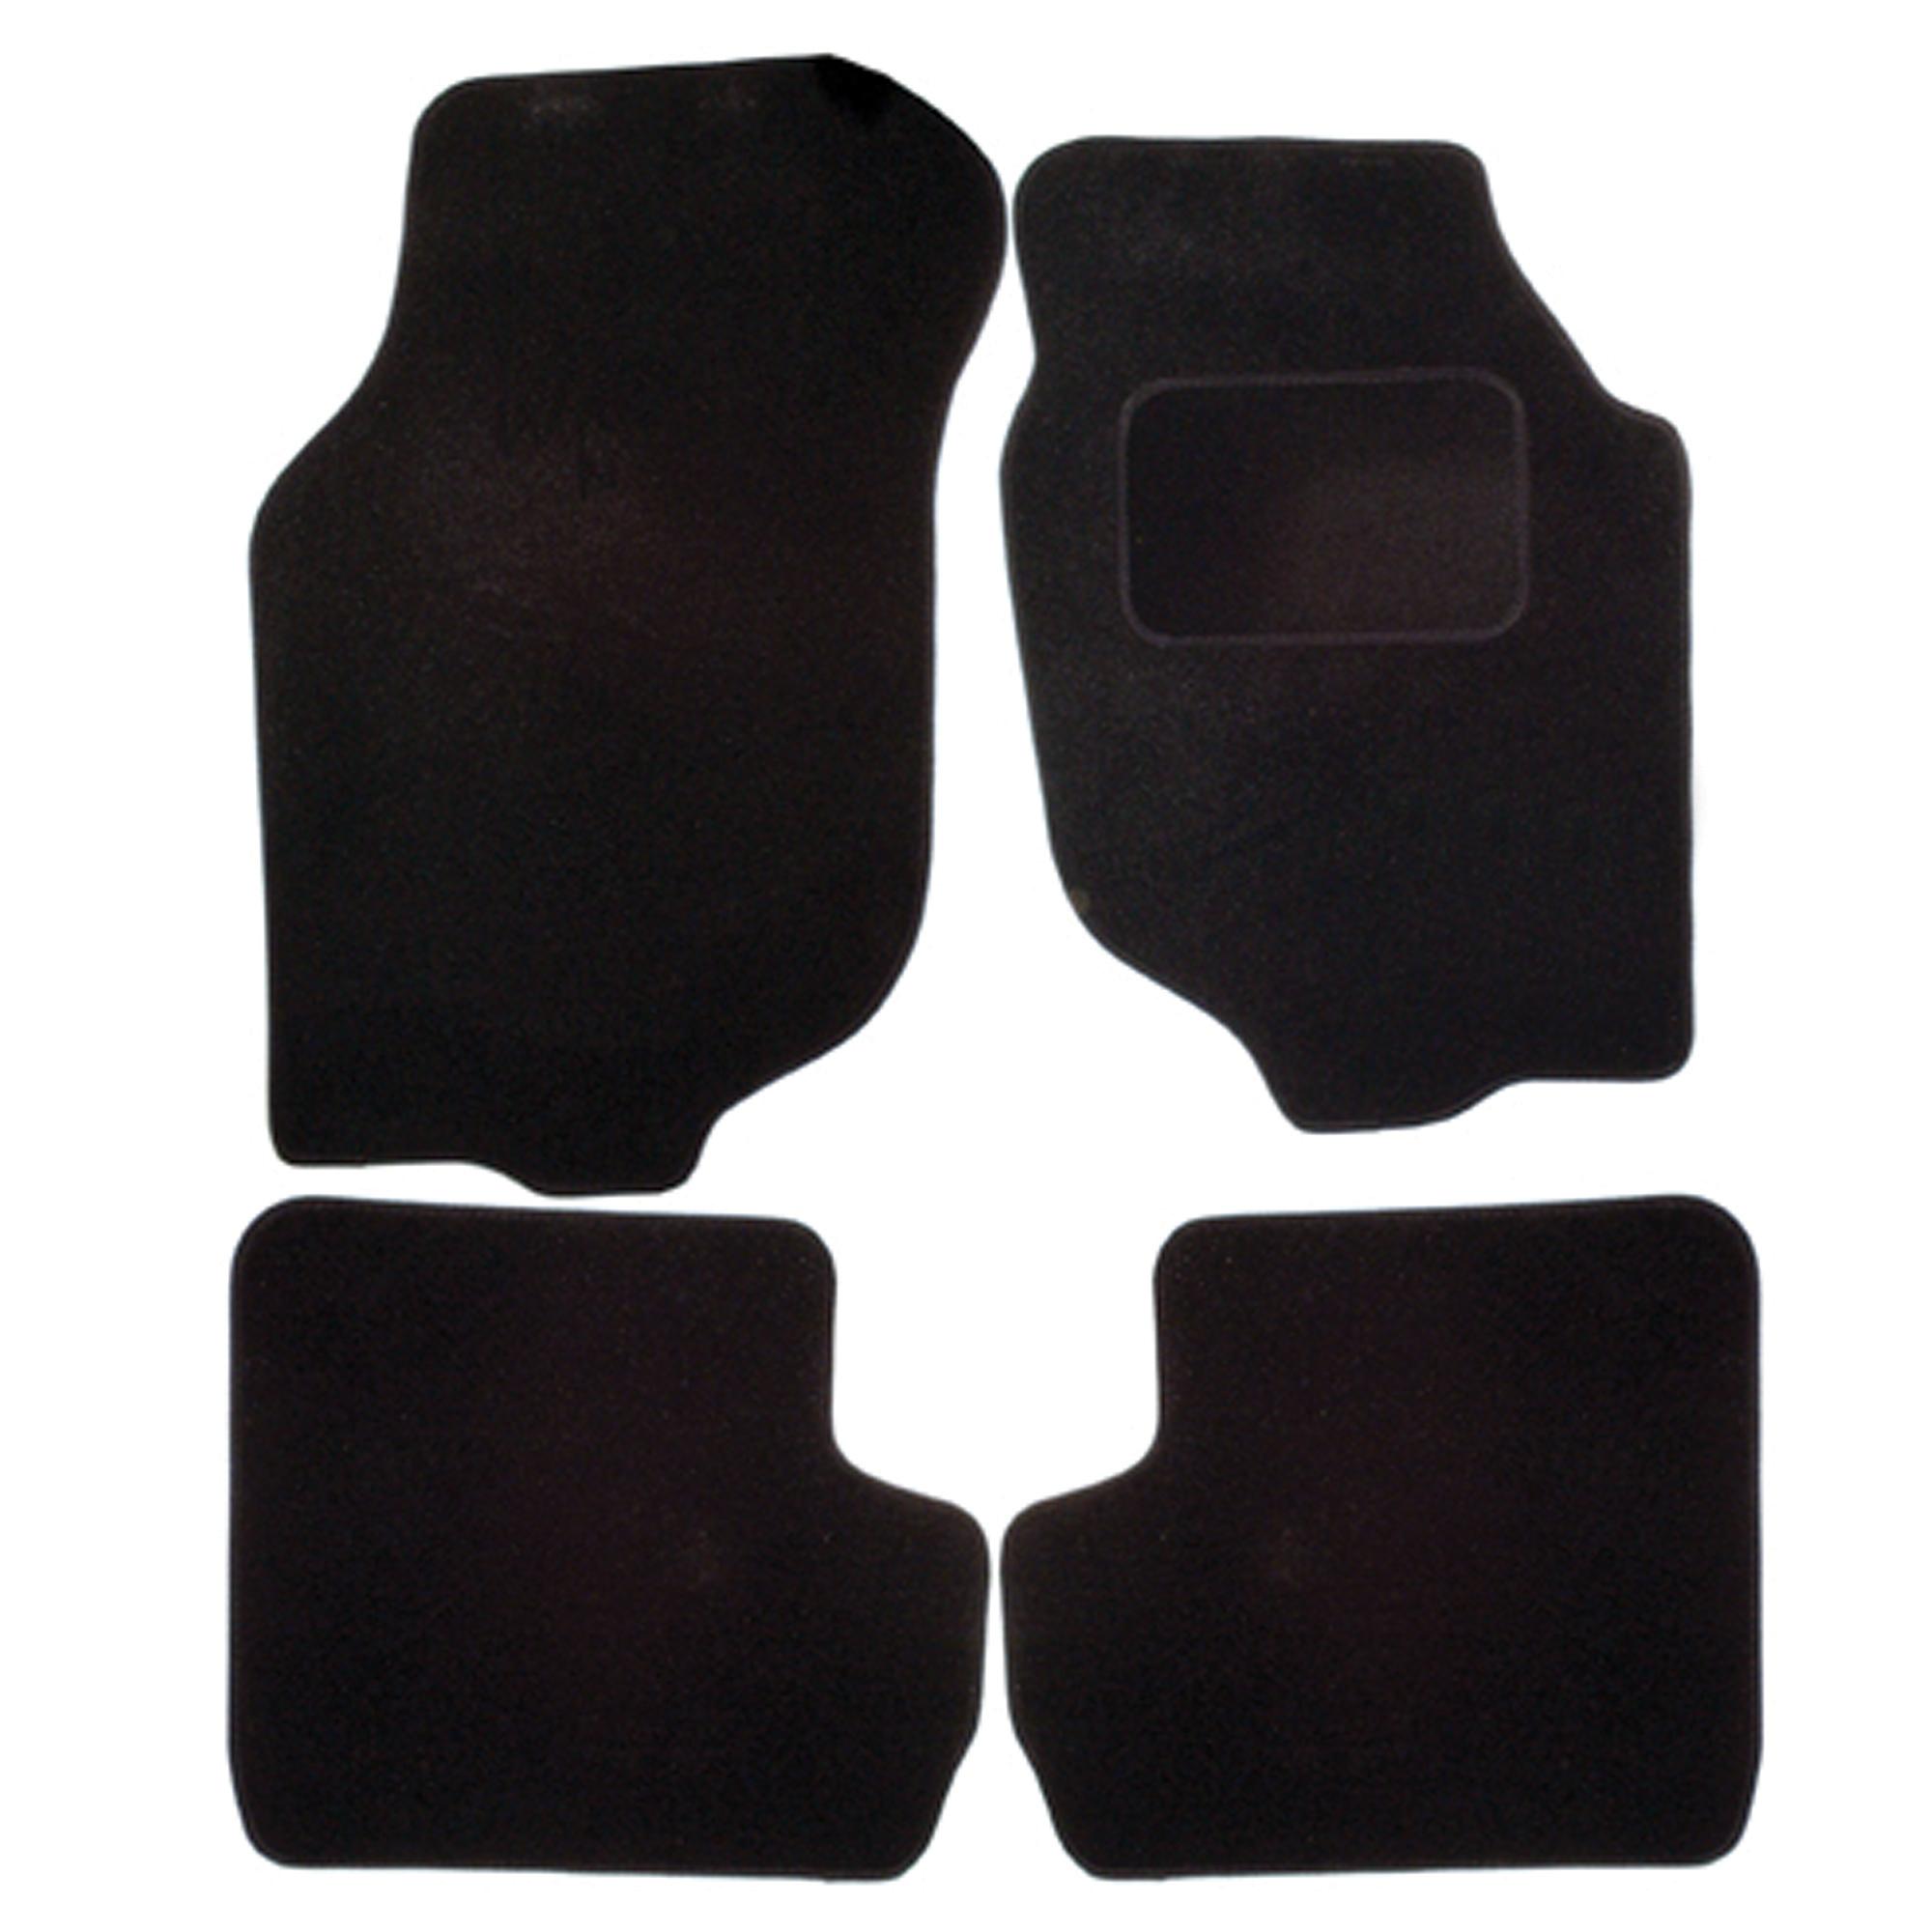 Rover 25 - Luxury Mats 0 Clips (Ss1044)